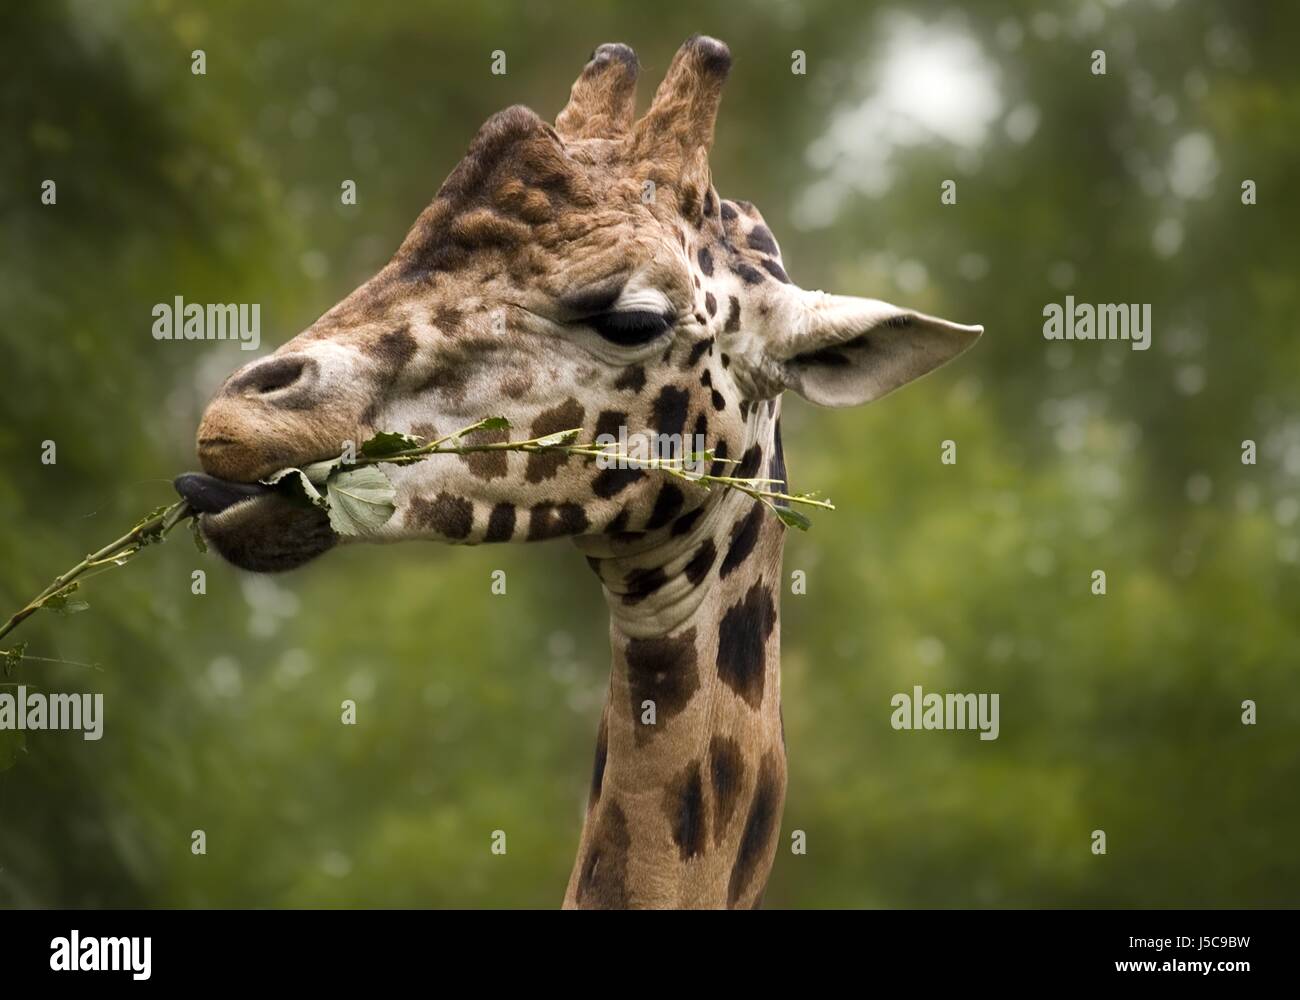 make profile animal africa tongue location shot lateral stretch dainty one long Stock Photo